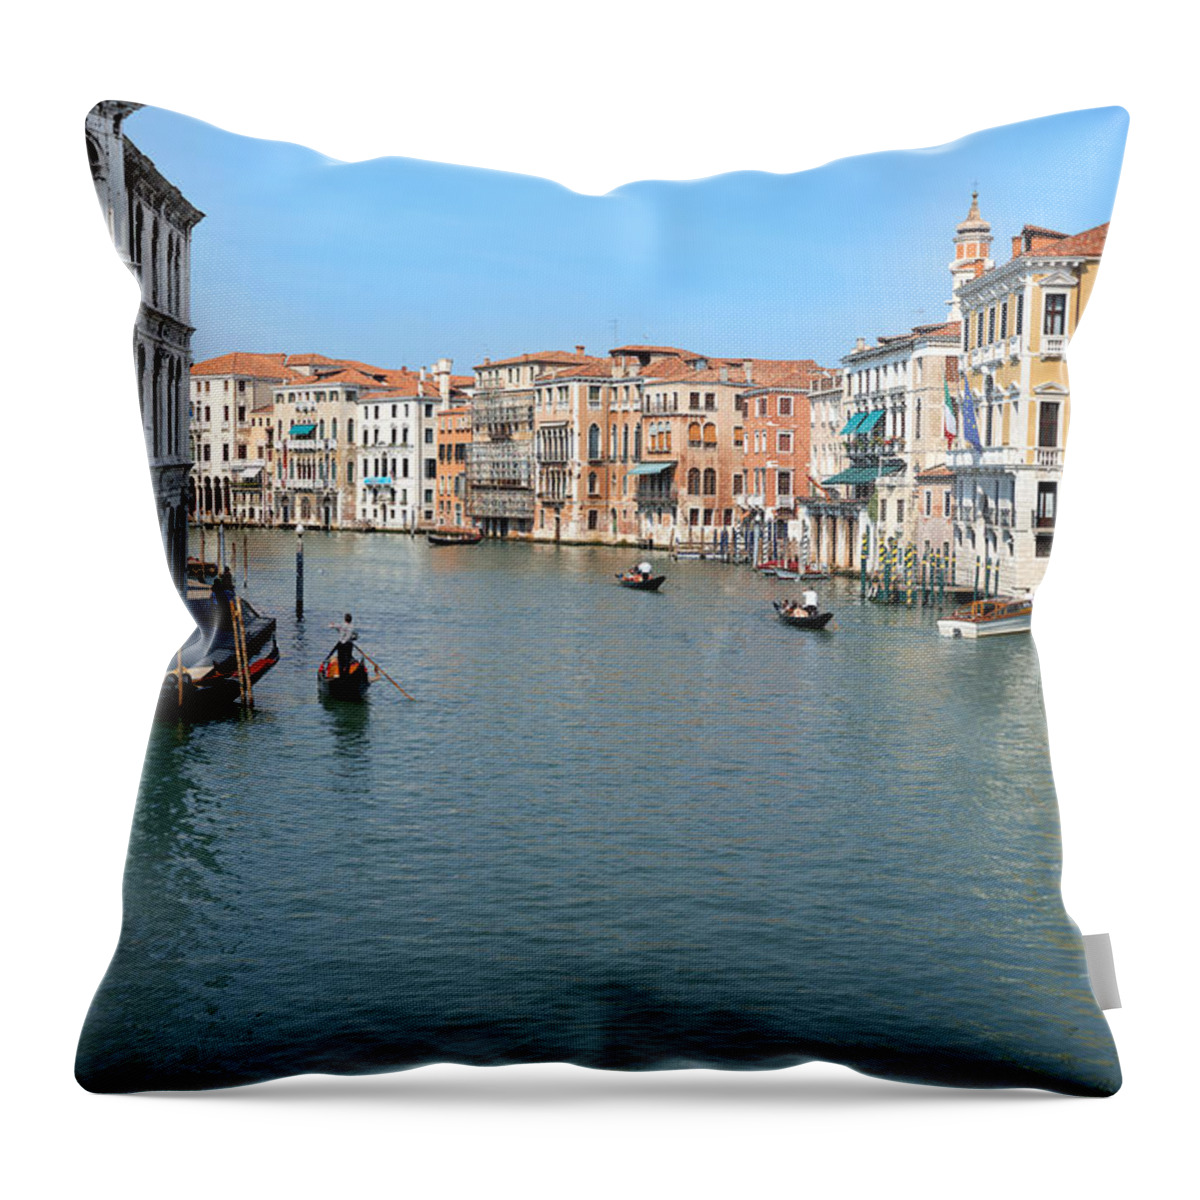 Adriatic Sea Throw Pillow featuring the photograph Gondolas At Grand Canal In Venice by Visual7